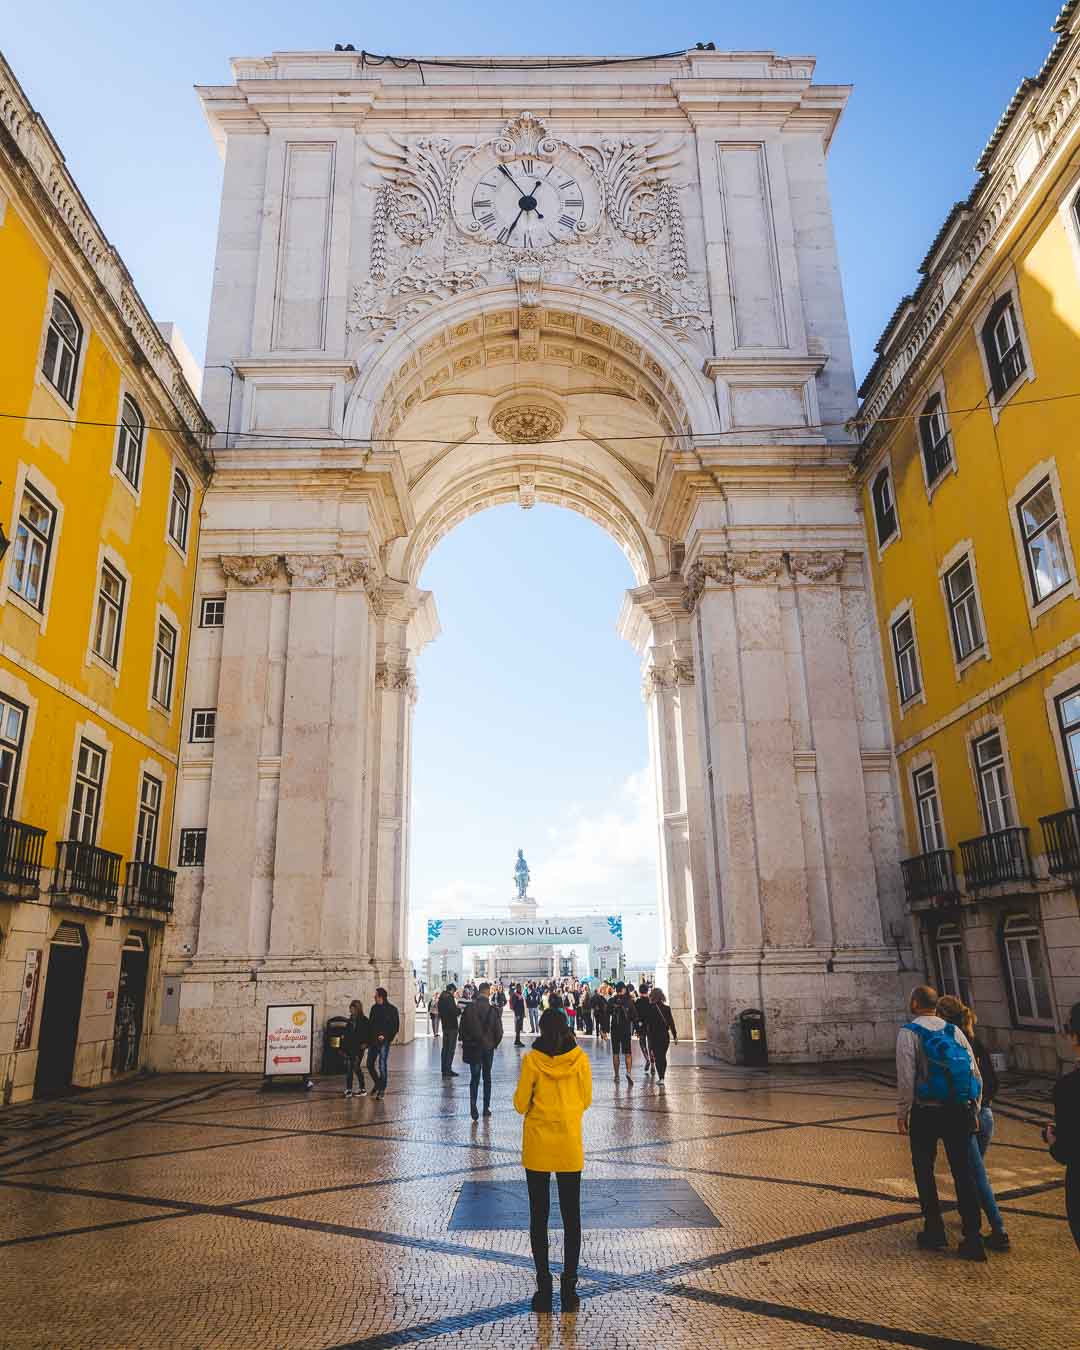 baixa is one of the best areas to stay in lisbon